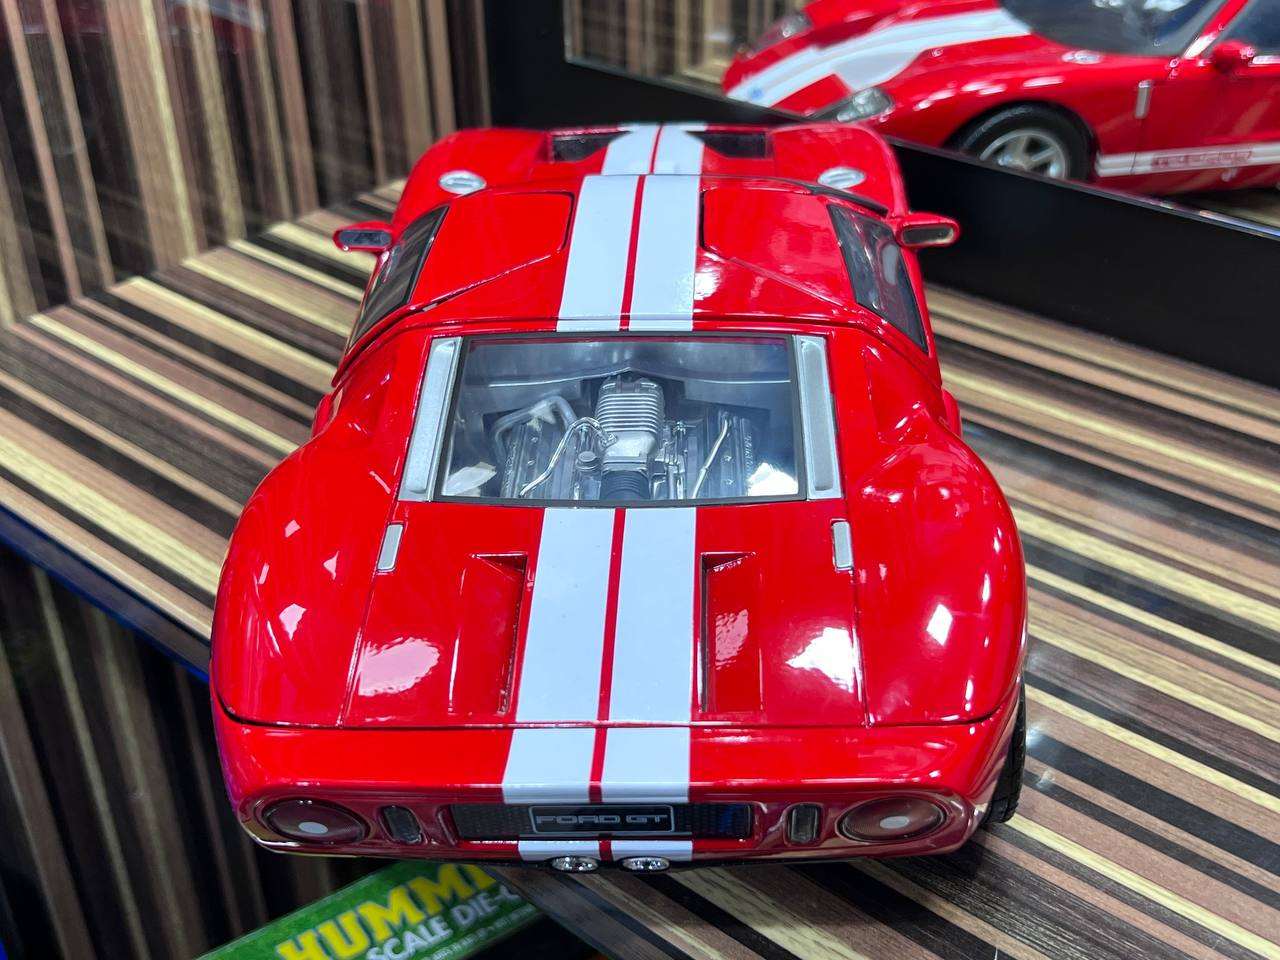 1/12 Diecast Ford GT Concept Red Model Car by Motor Max